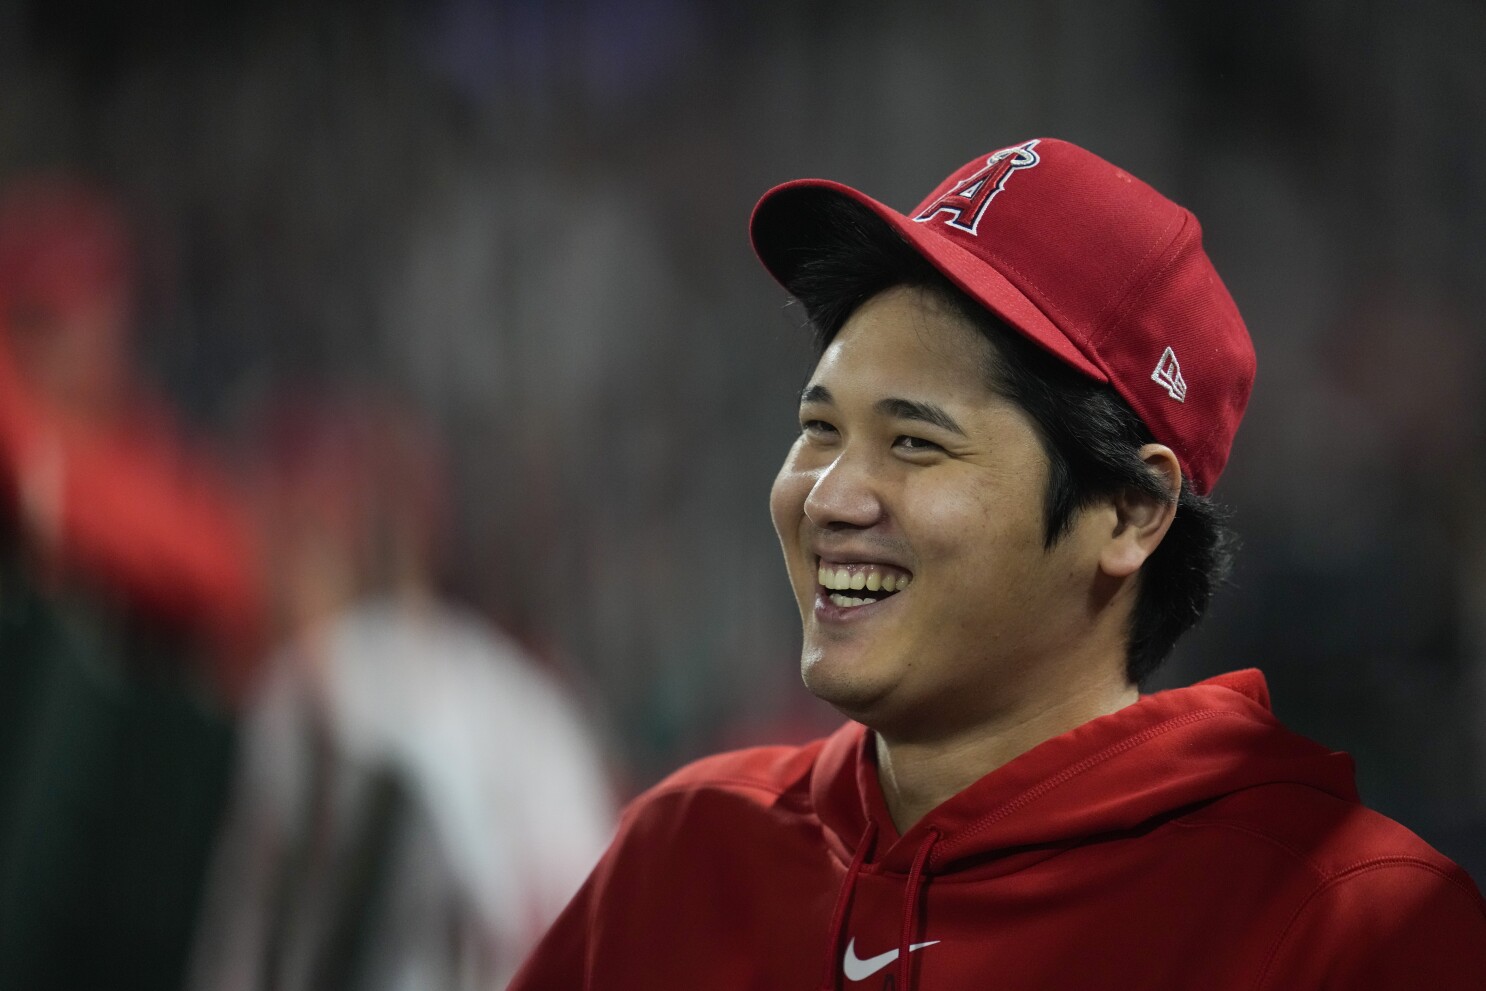 Shohei Ohtani has elbow surgery. His doctor expects he will return by  opening day '24 and pitching by '25